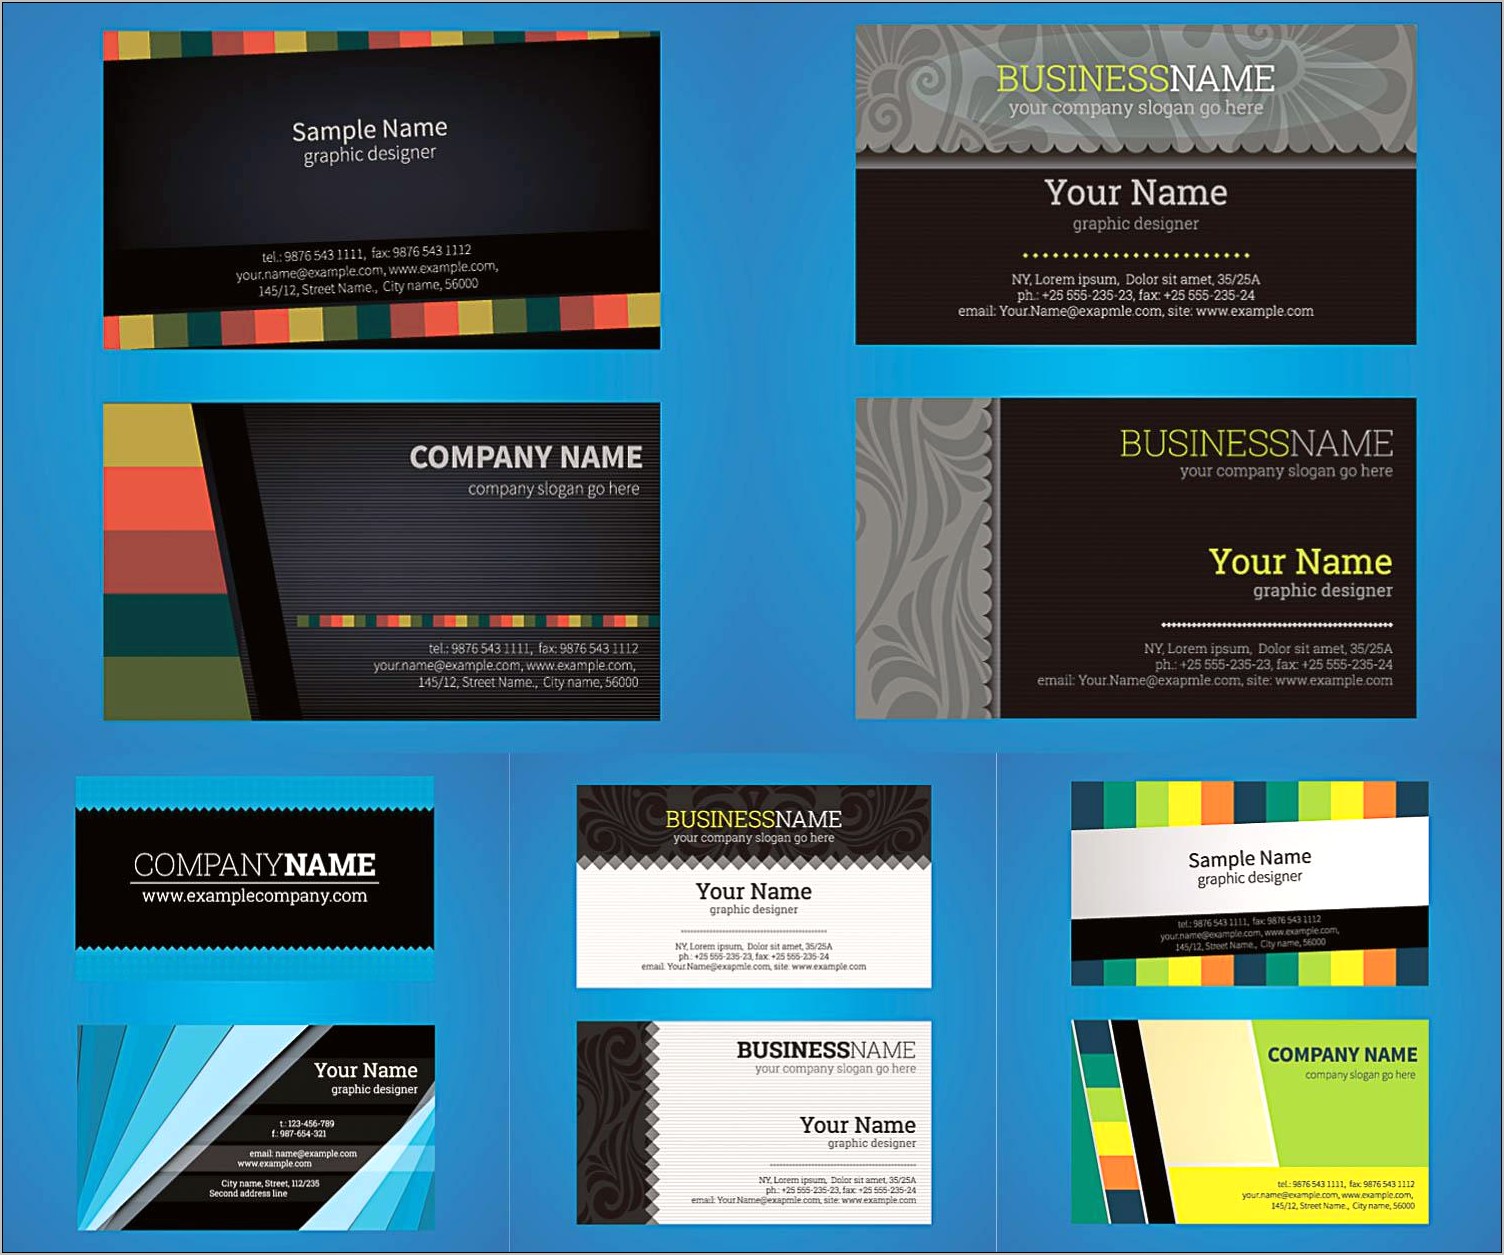 Business Card Template Illustrator Free Download